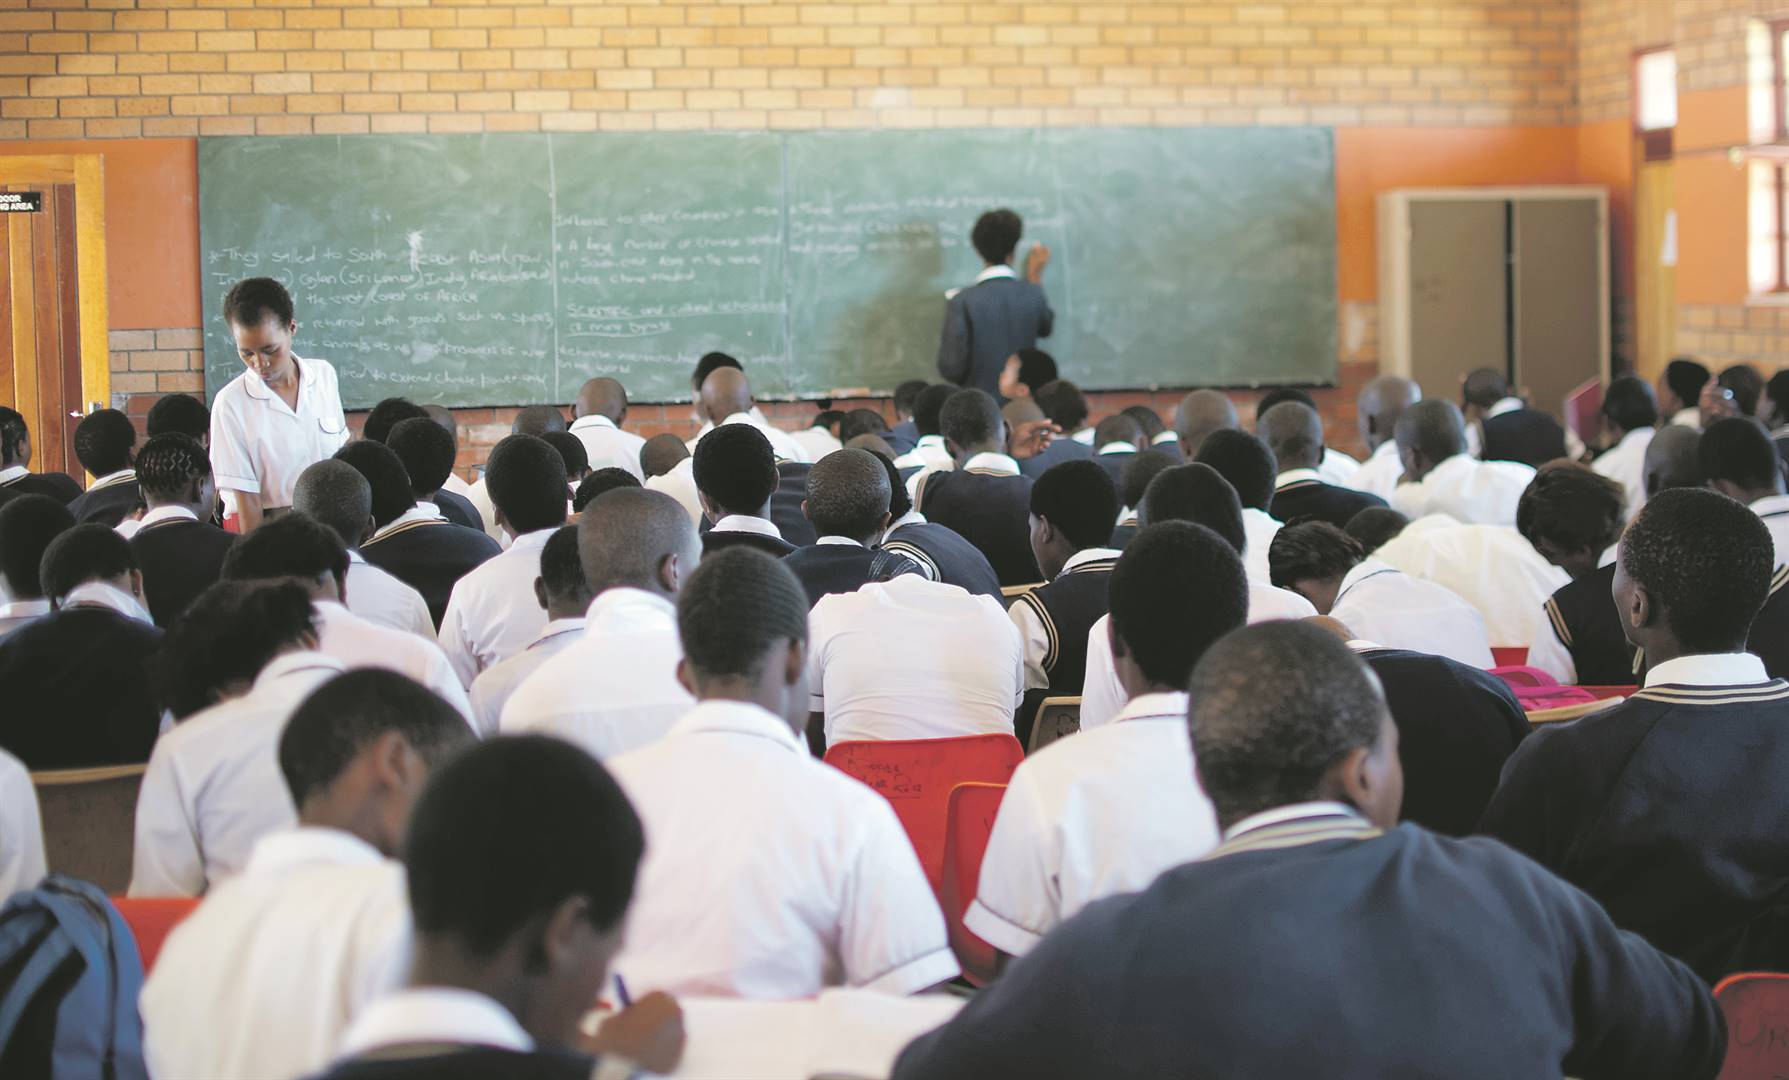 Classrooms at Meyisi Senior Secondary School in Flagstaff near Lusikisiki are overcrowded. There will be a need for more classrooms if schools are to maintain proper social distancing. Picture: Mziwoxolo Mtola